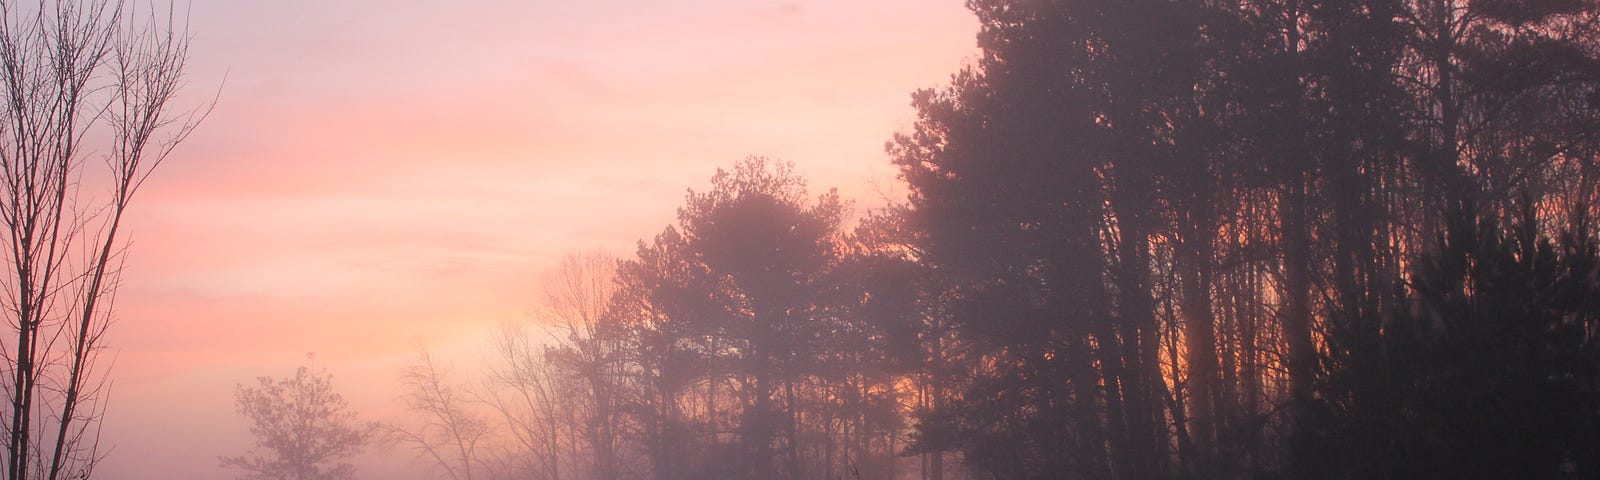 A pink and orange sky emerges from the mist in the sunrise behind a stand of trees